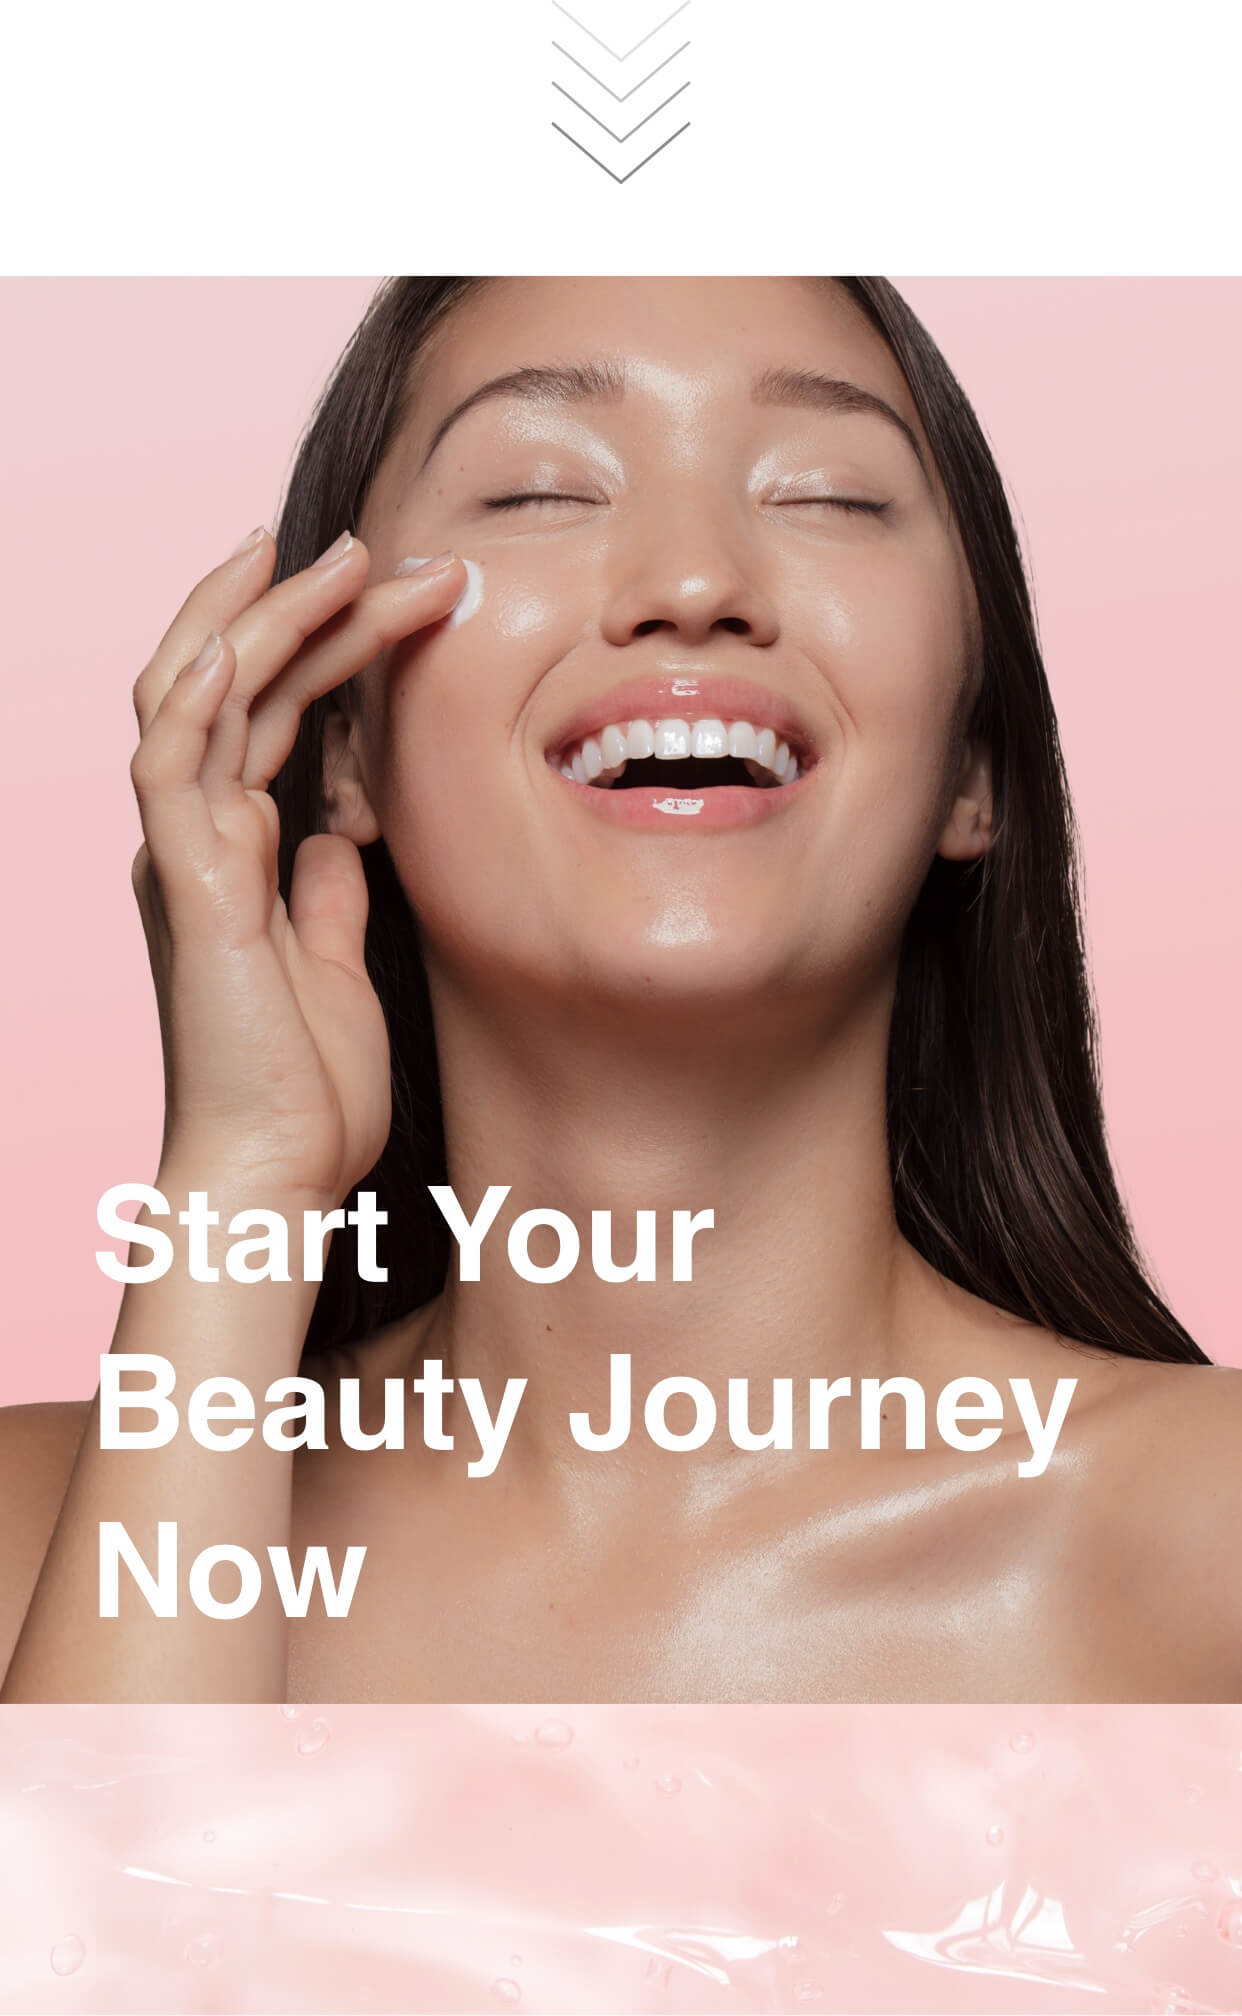 Start Your Beauty Journey Now